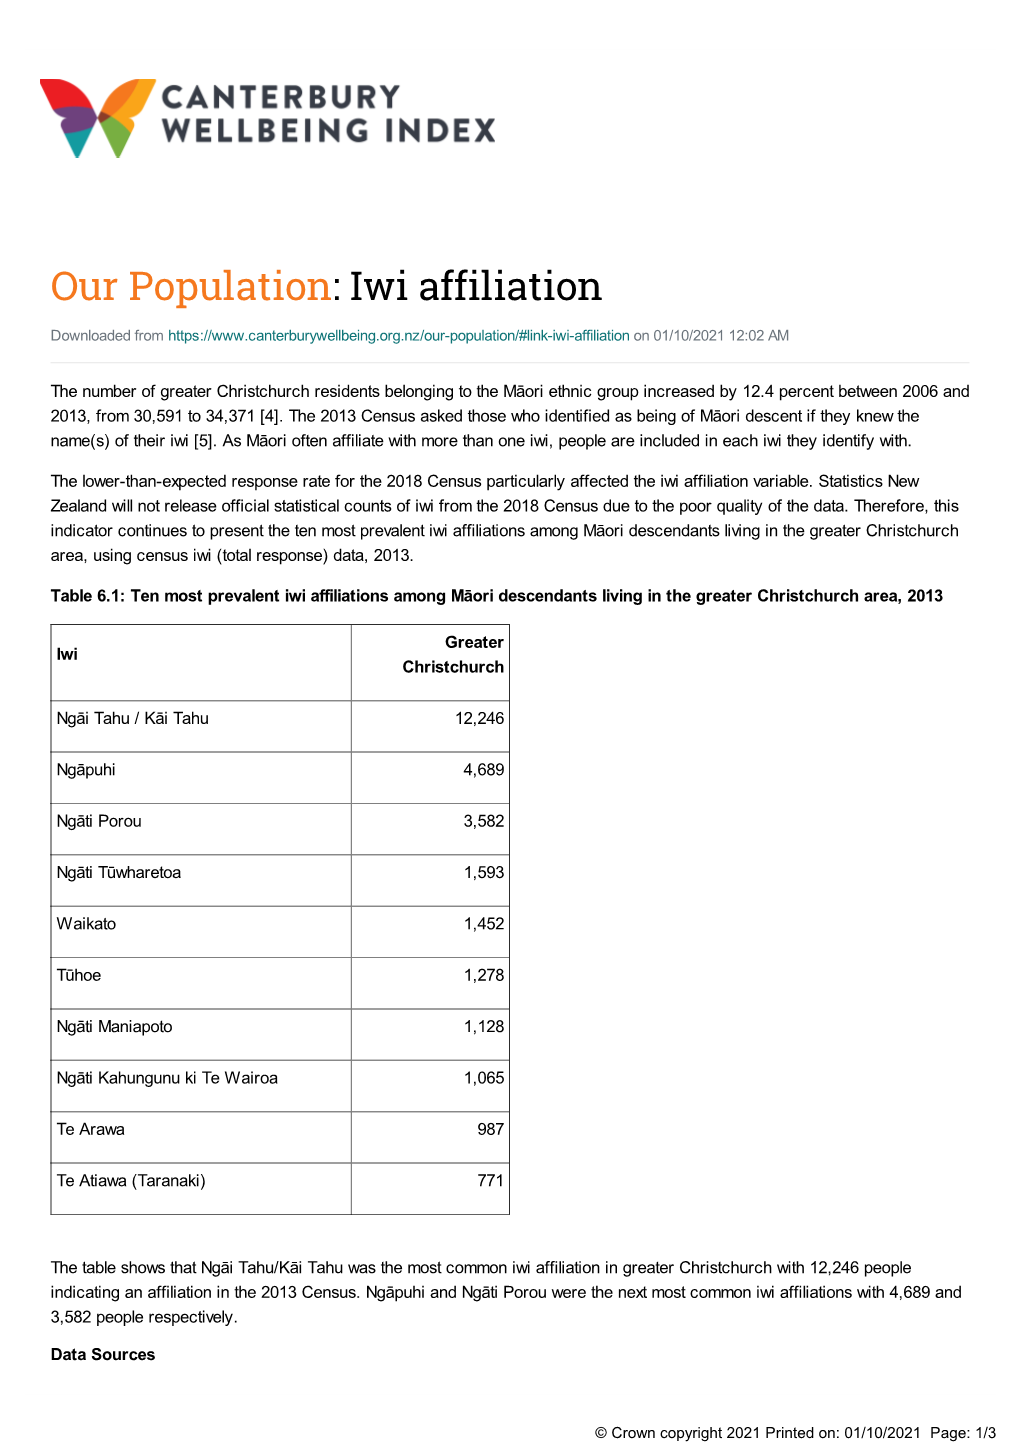 Our Population: Iwi Affiliation